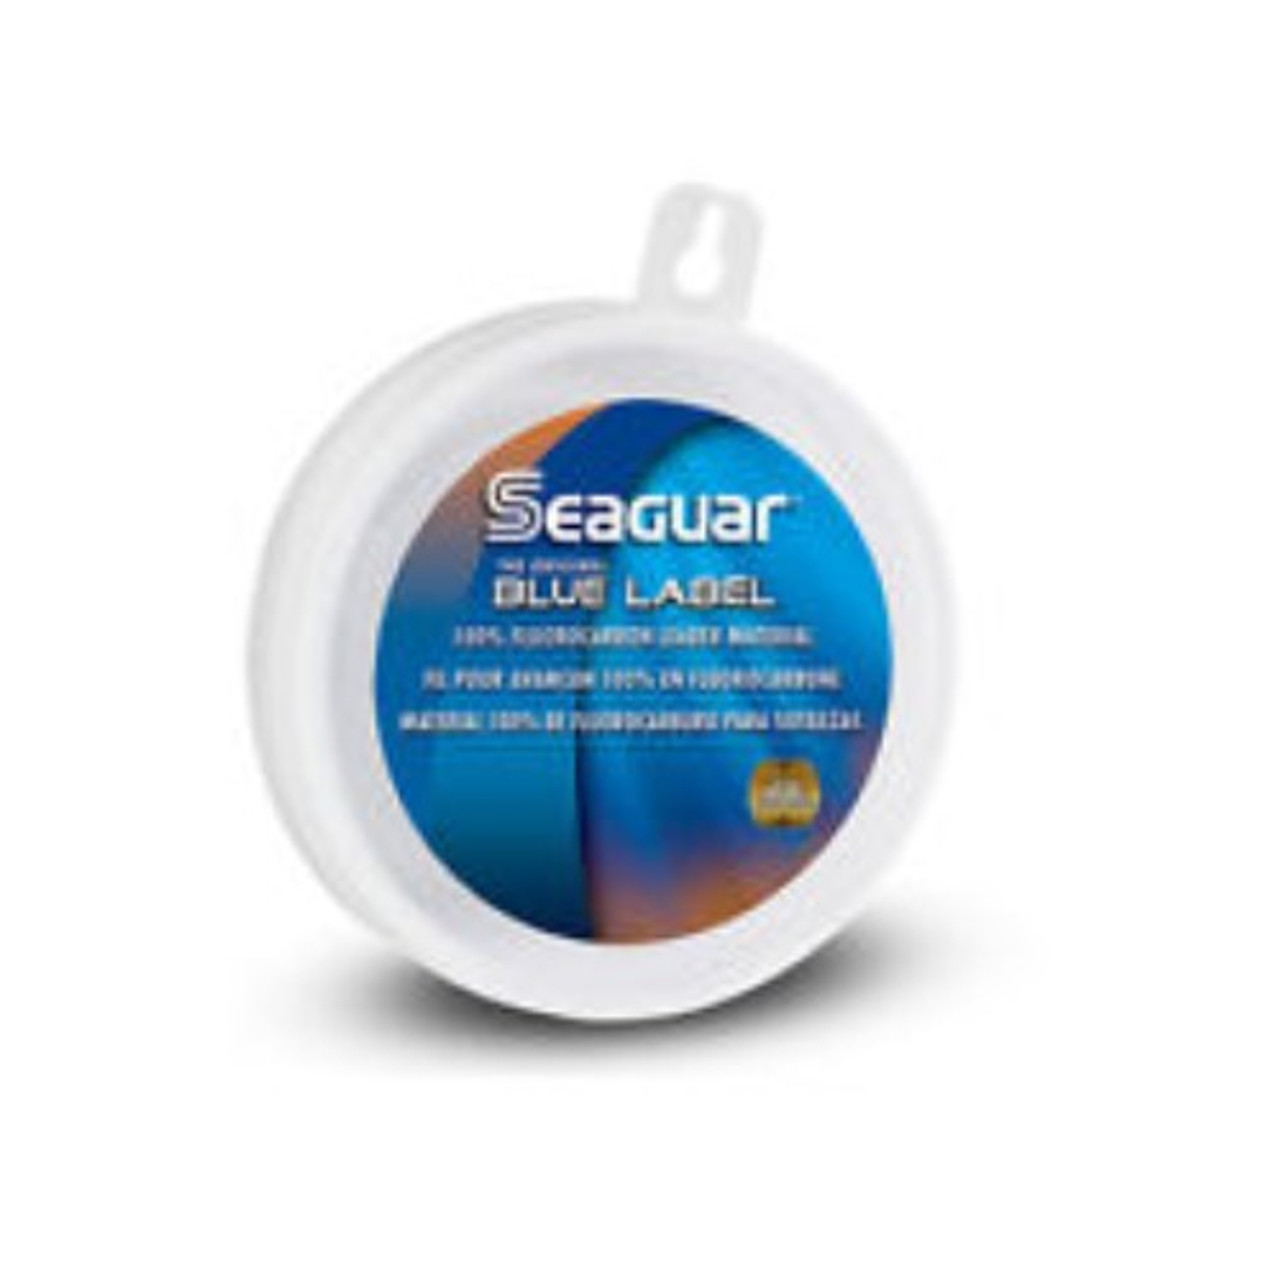 SEAGUAR Blue Label Fishing Line - 50lbs - The Harbour Chandler